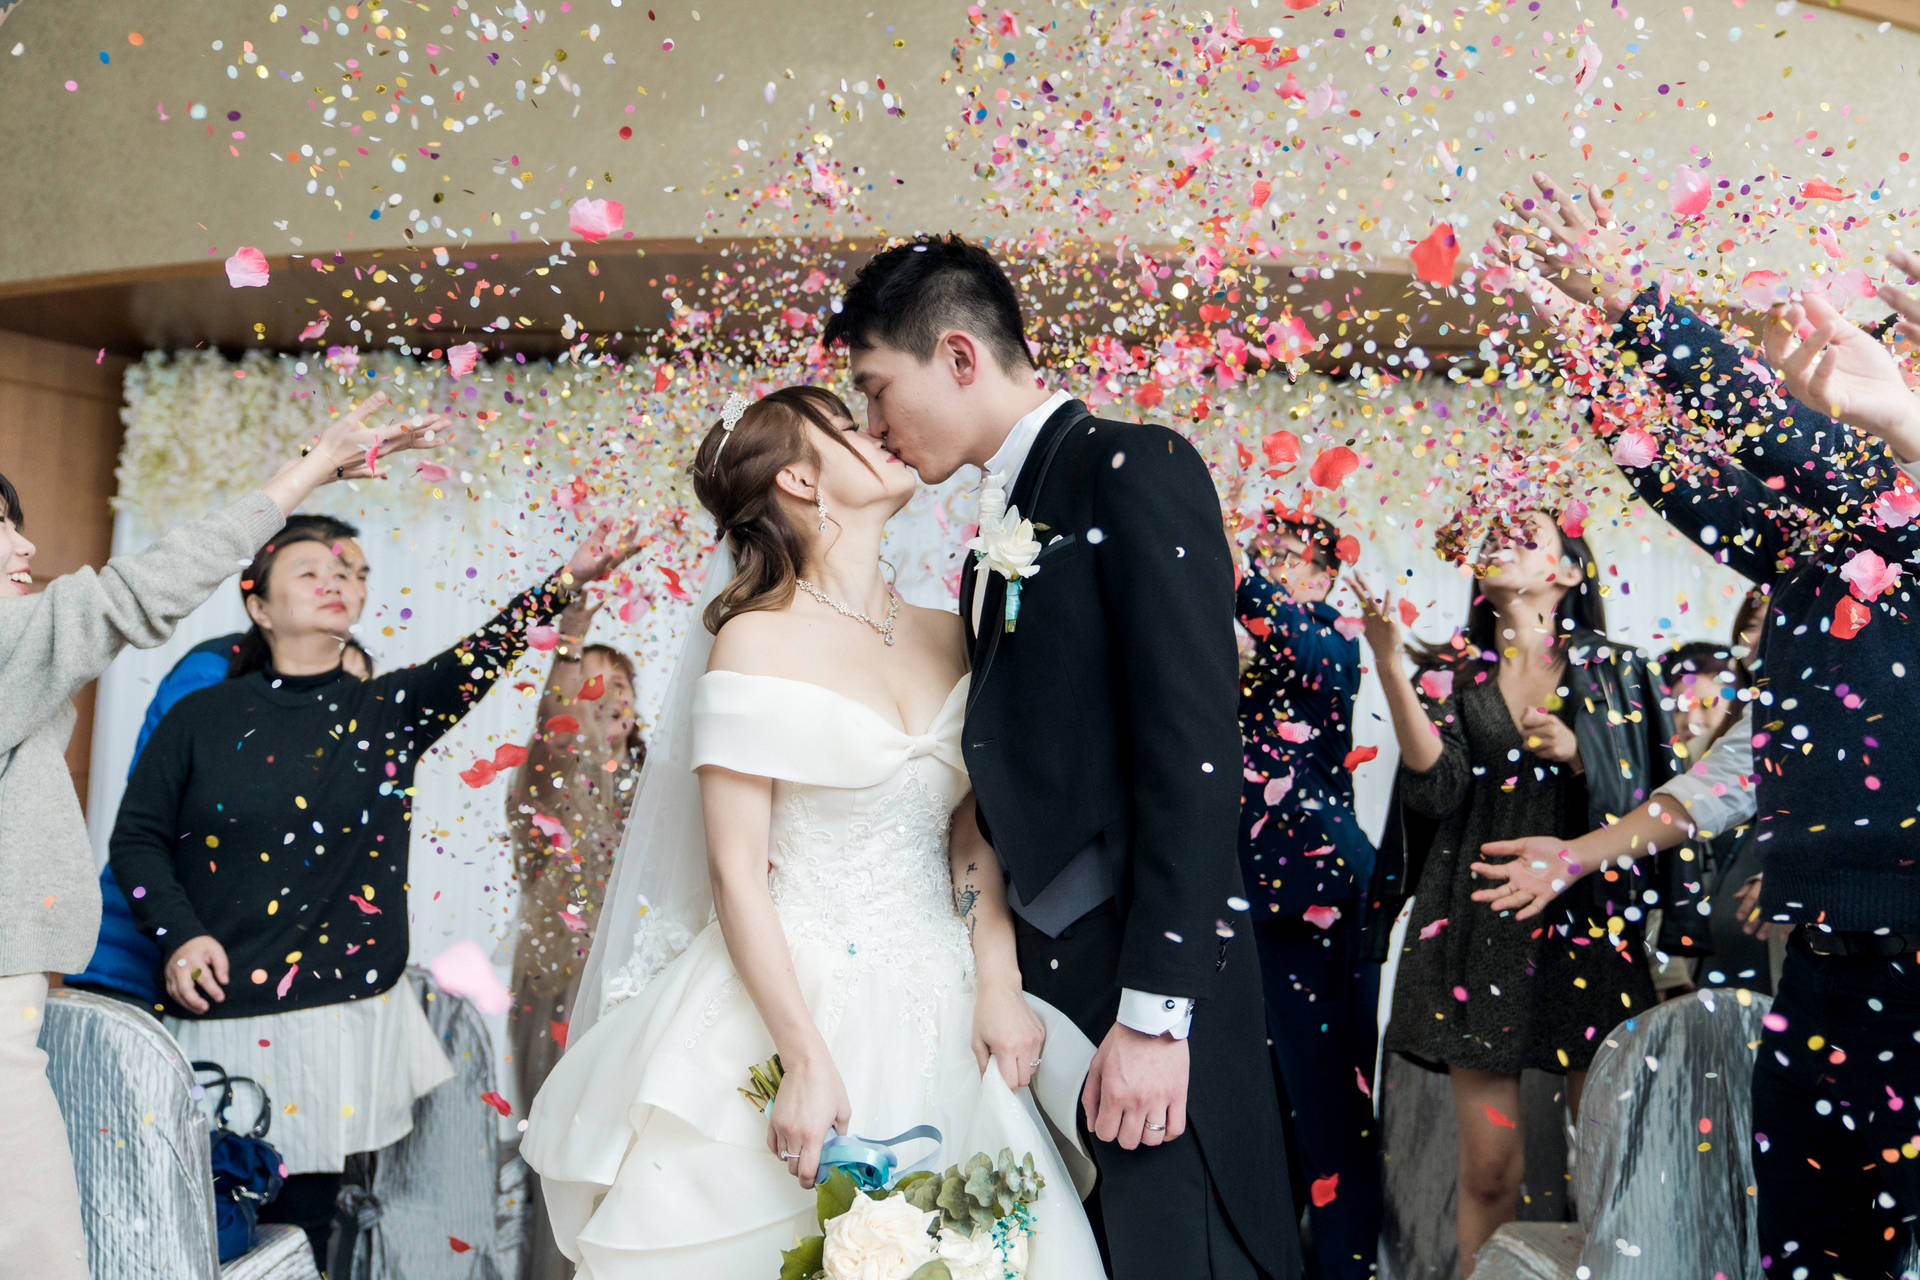 Groom And Bride With Confetti Wallpaper